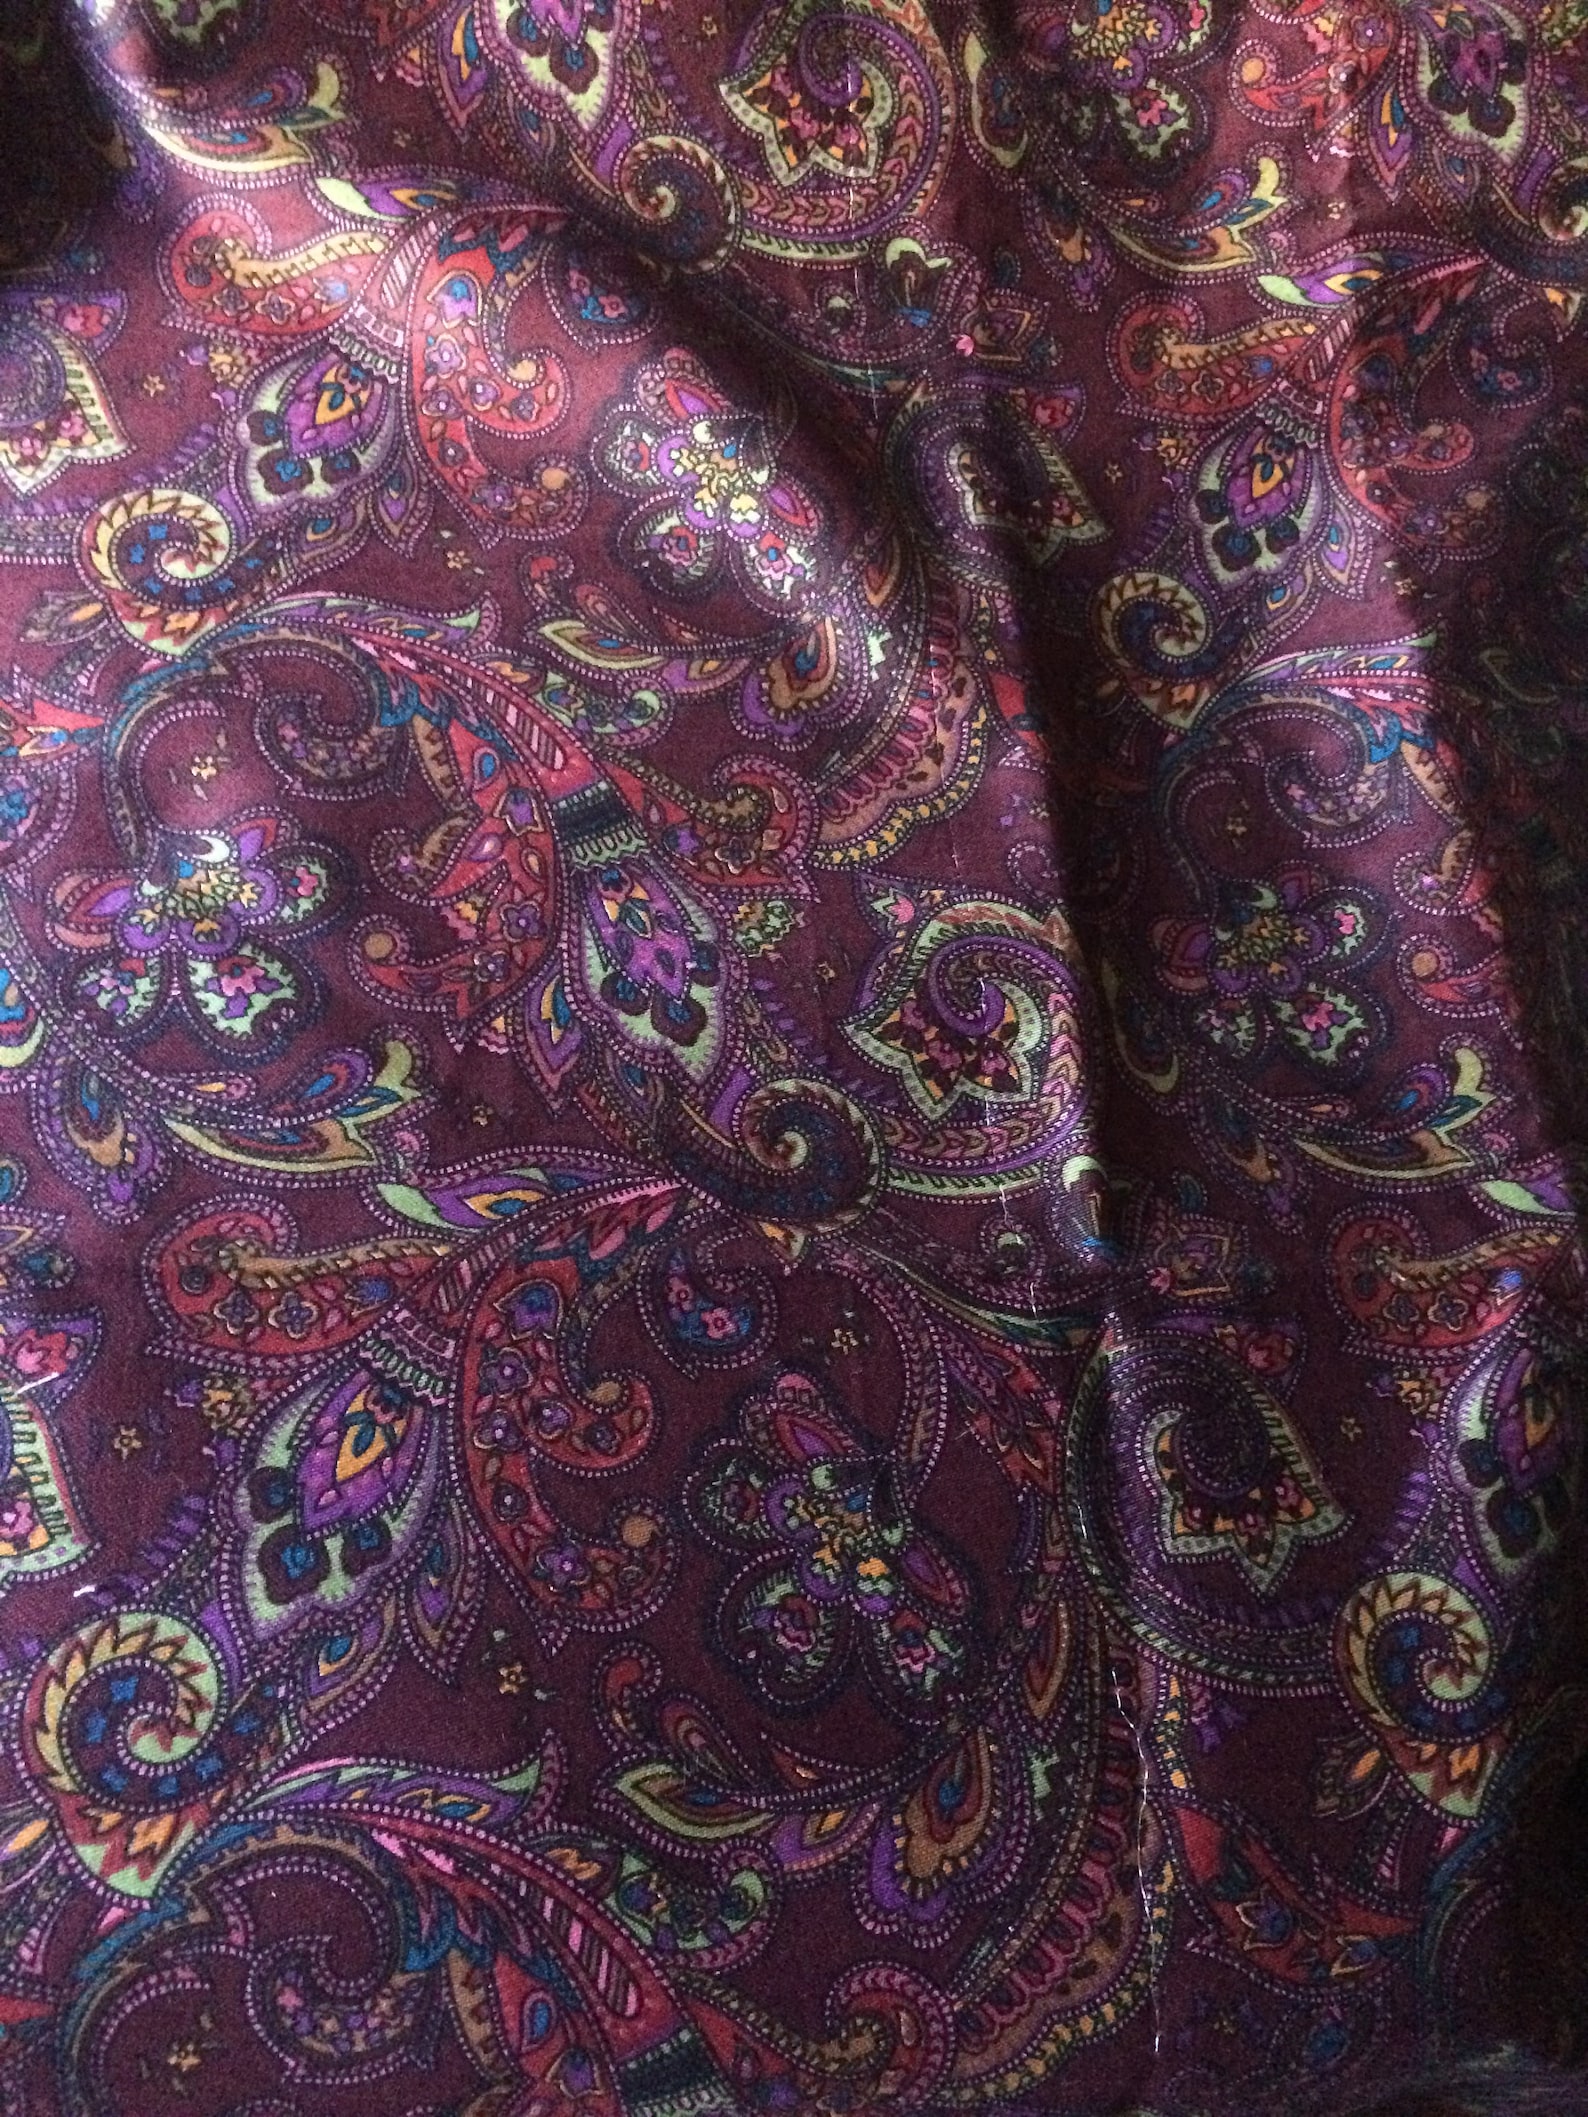 Vintage Fabric Dark Burgundy Paisley Cotton Made in England - Etsy